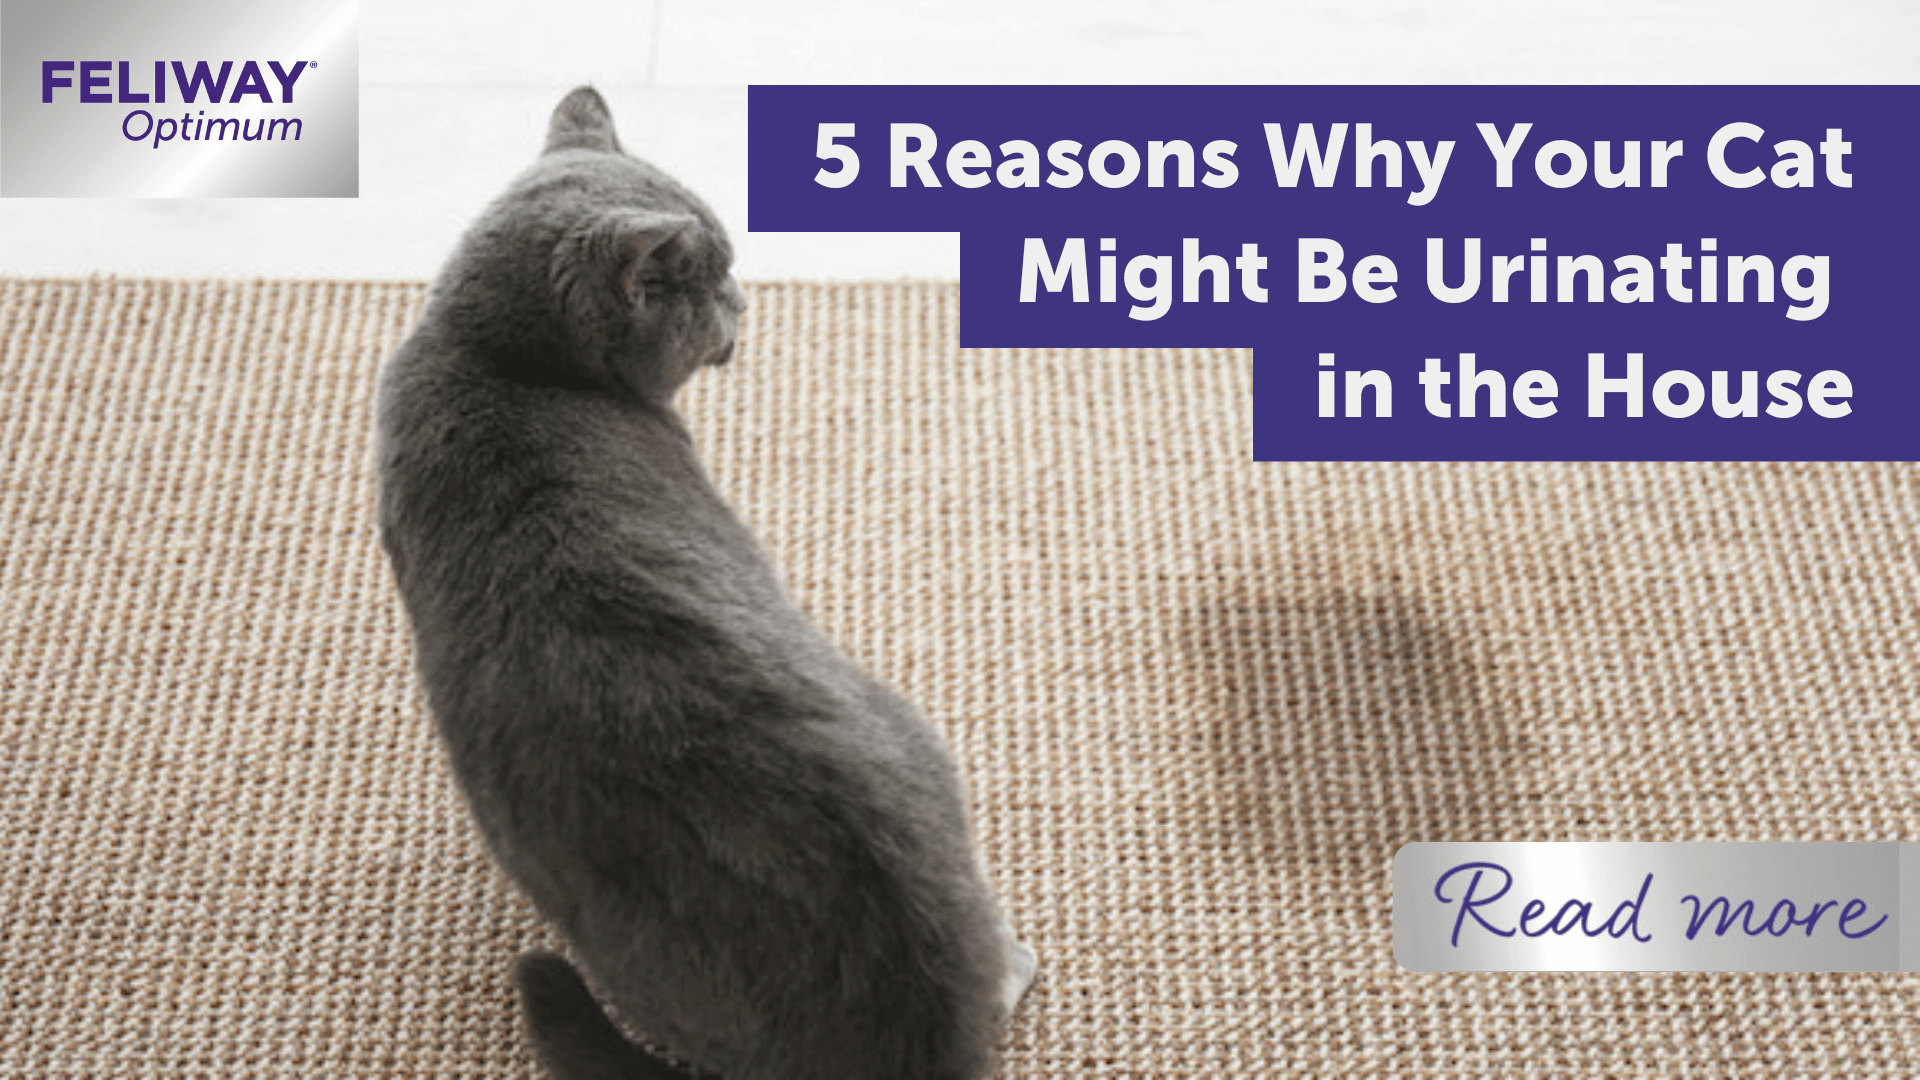 5 Reasons Why Your Cat Might Be Urinating in the House